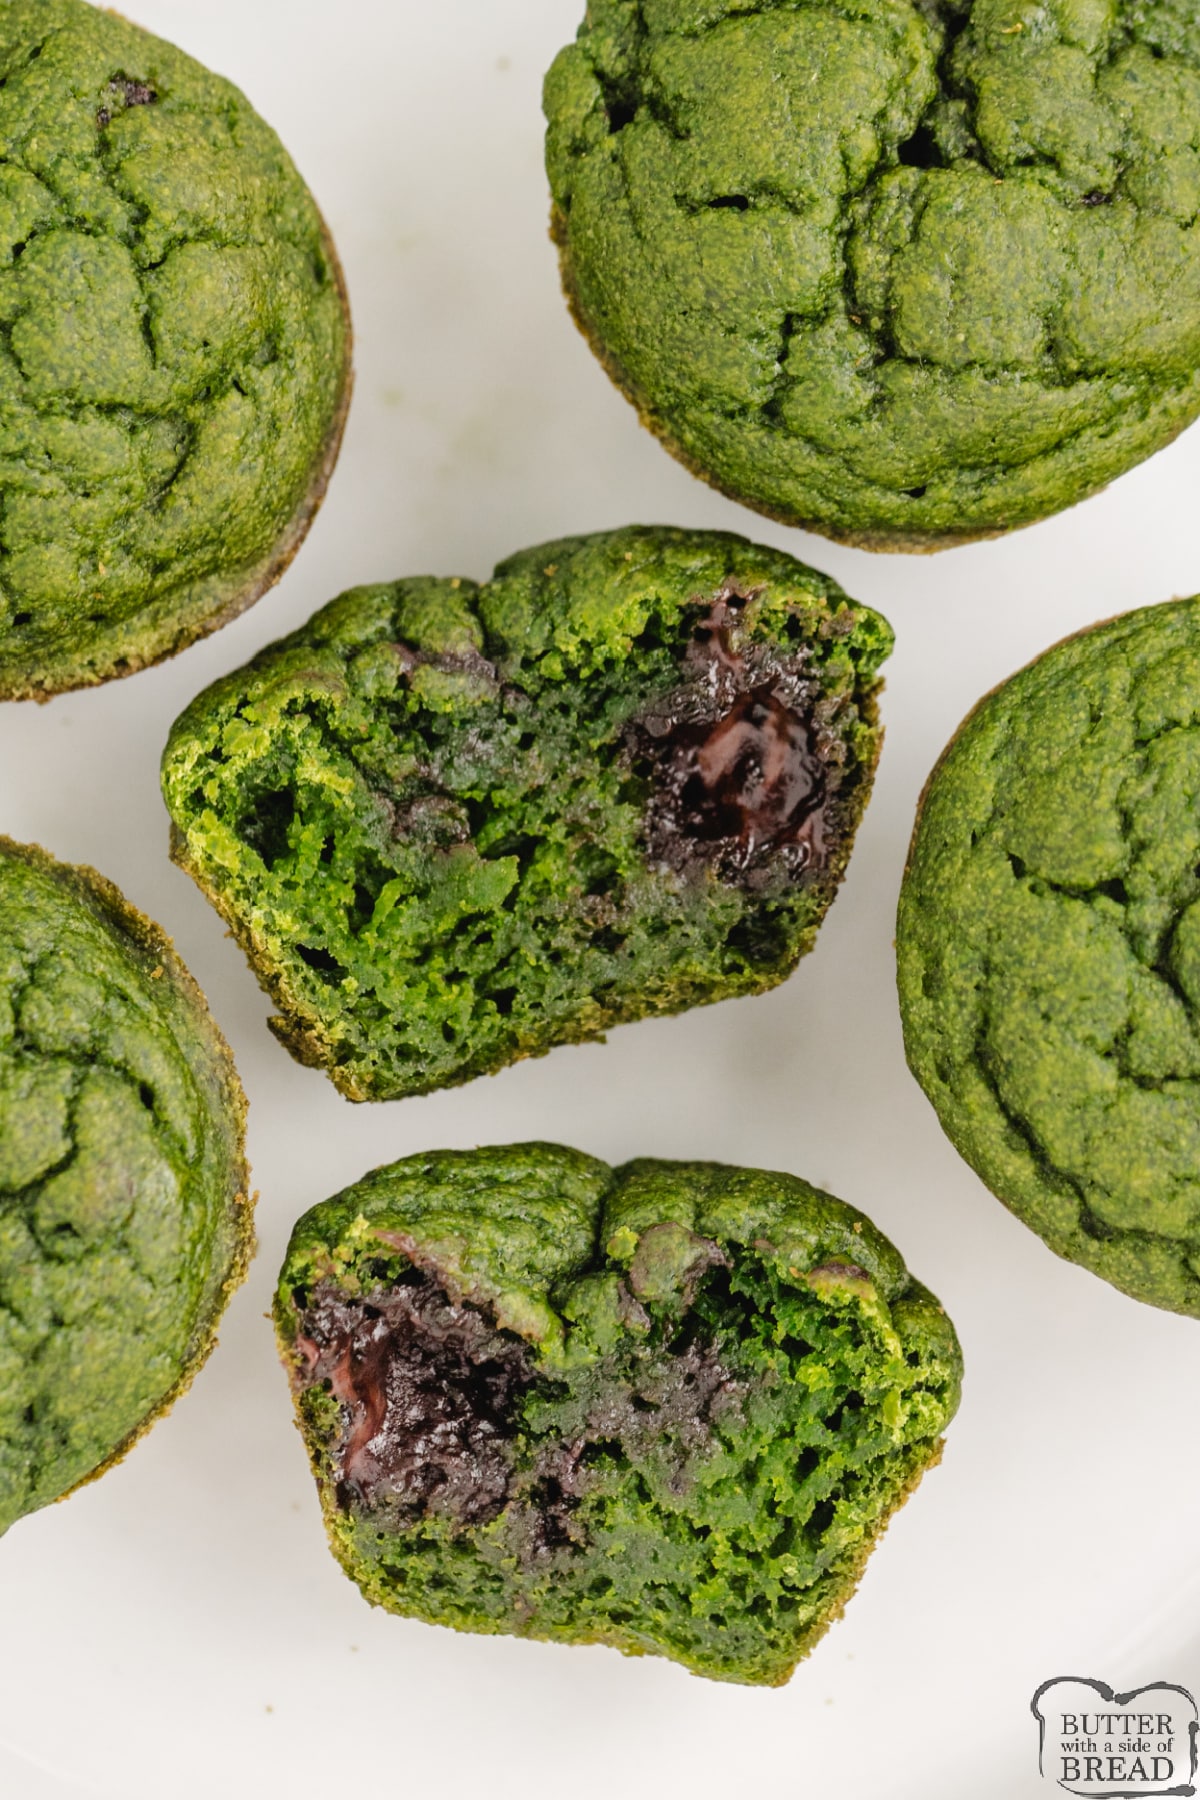 Mini muffins made with spinach, avocado and bananas. 